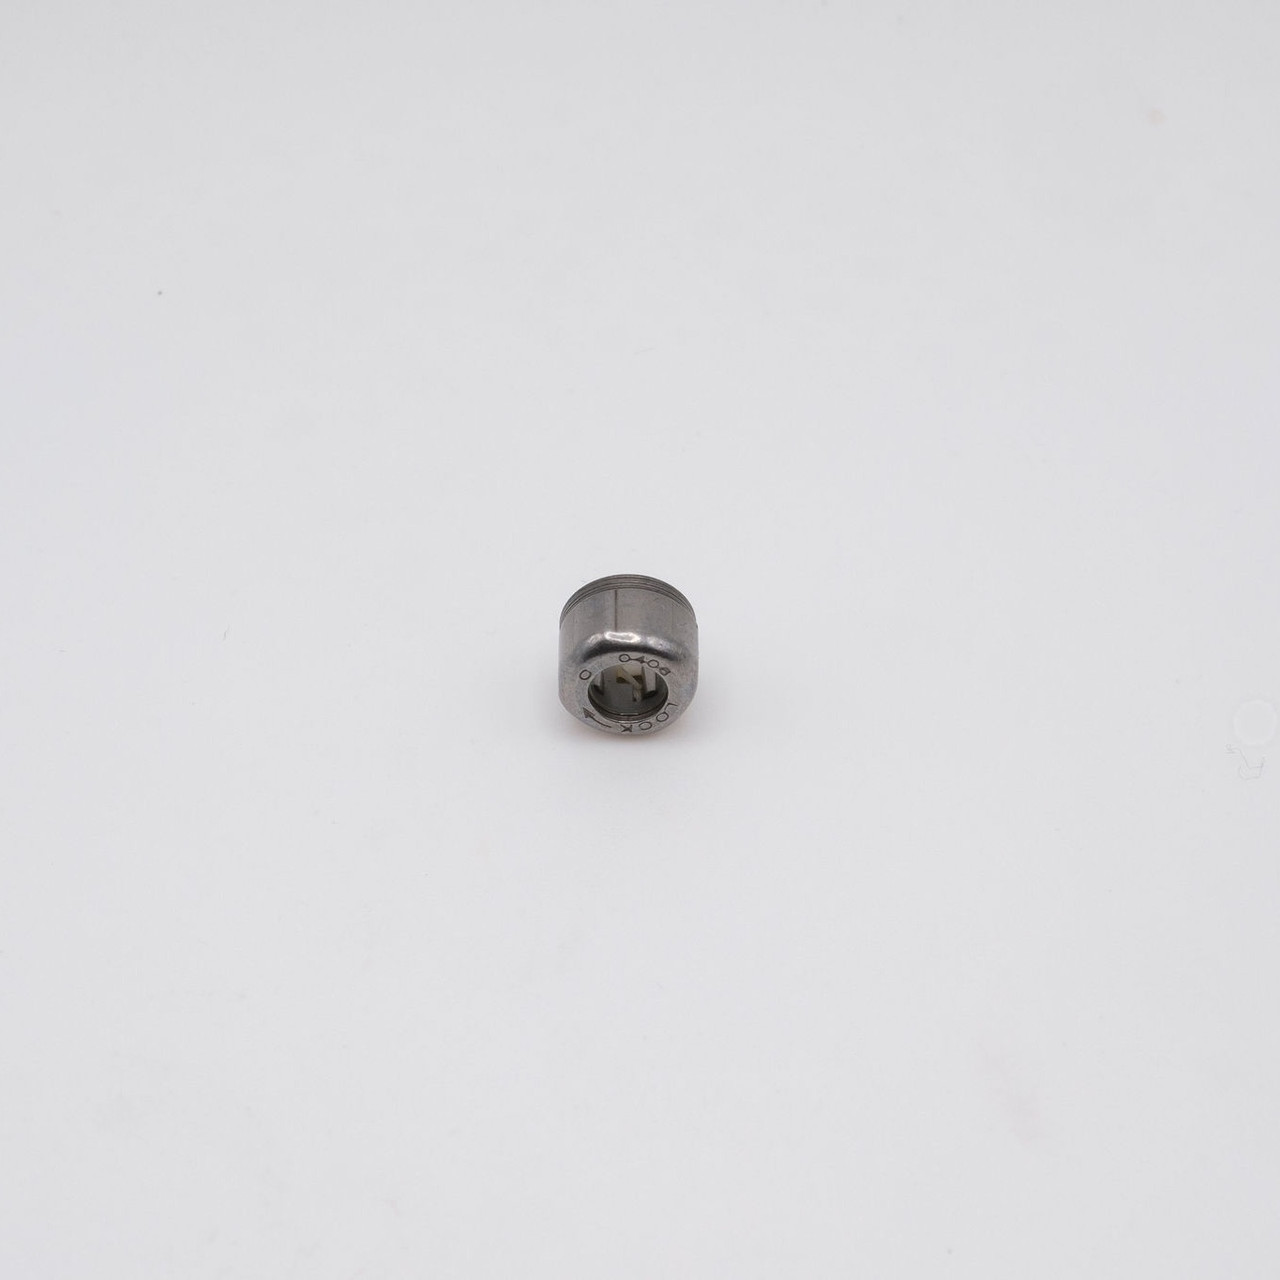 EWC0406 One Way Hexed Head Bearing 4x8x6mm Front View